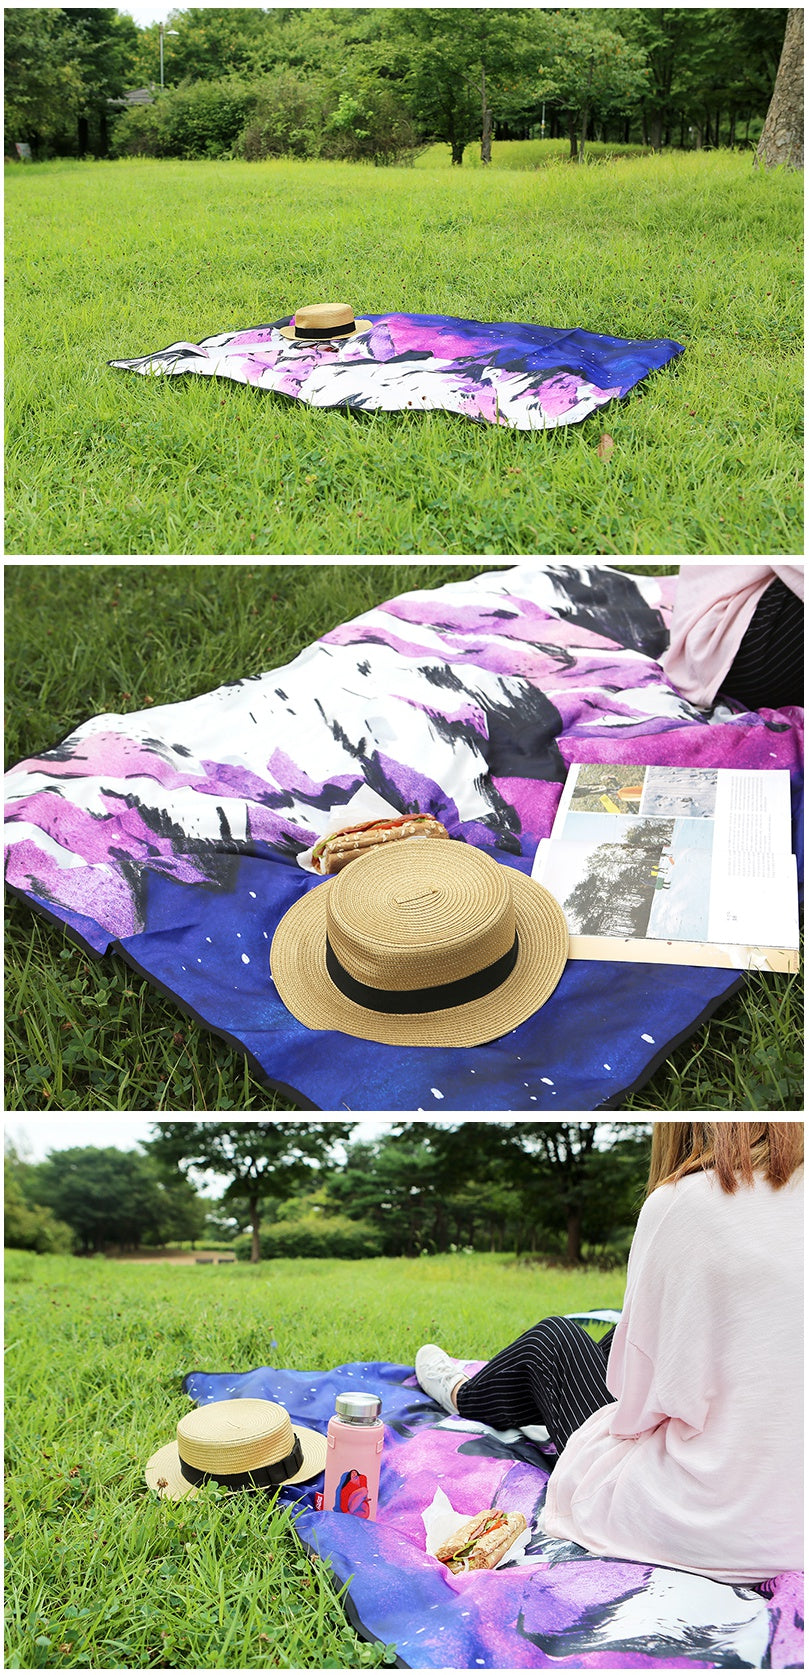 Moonlit night Milky Way Picnic Mats Pouch SET Graphic Blanket Square shaped Waterproof Outdoor Portable Camping Rugs Beaches